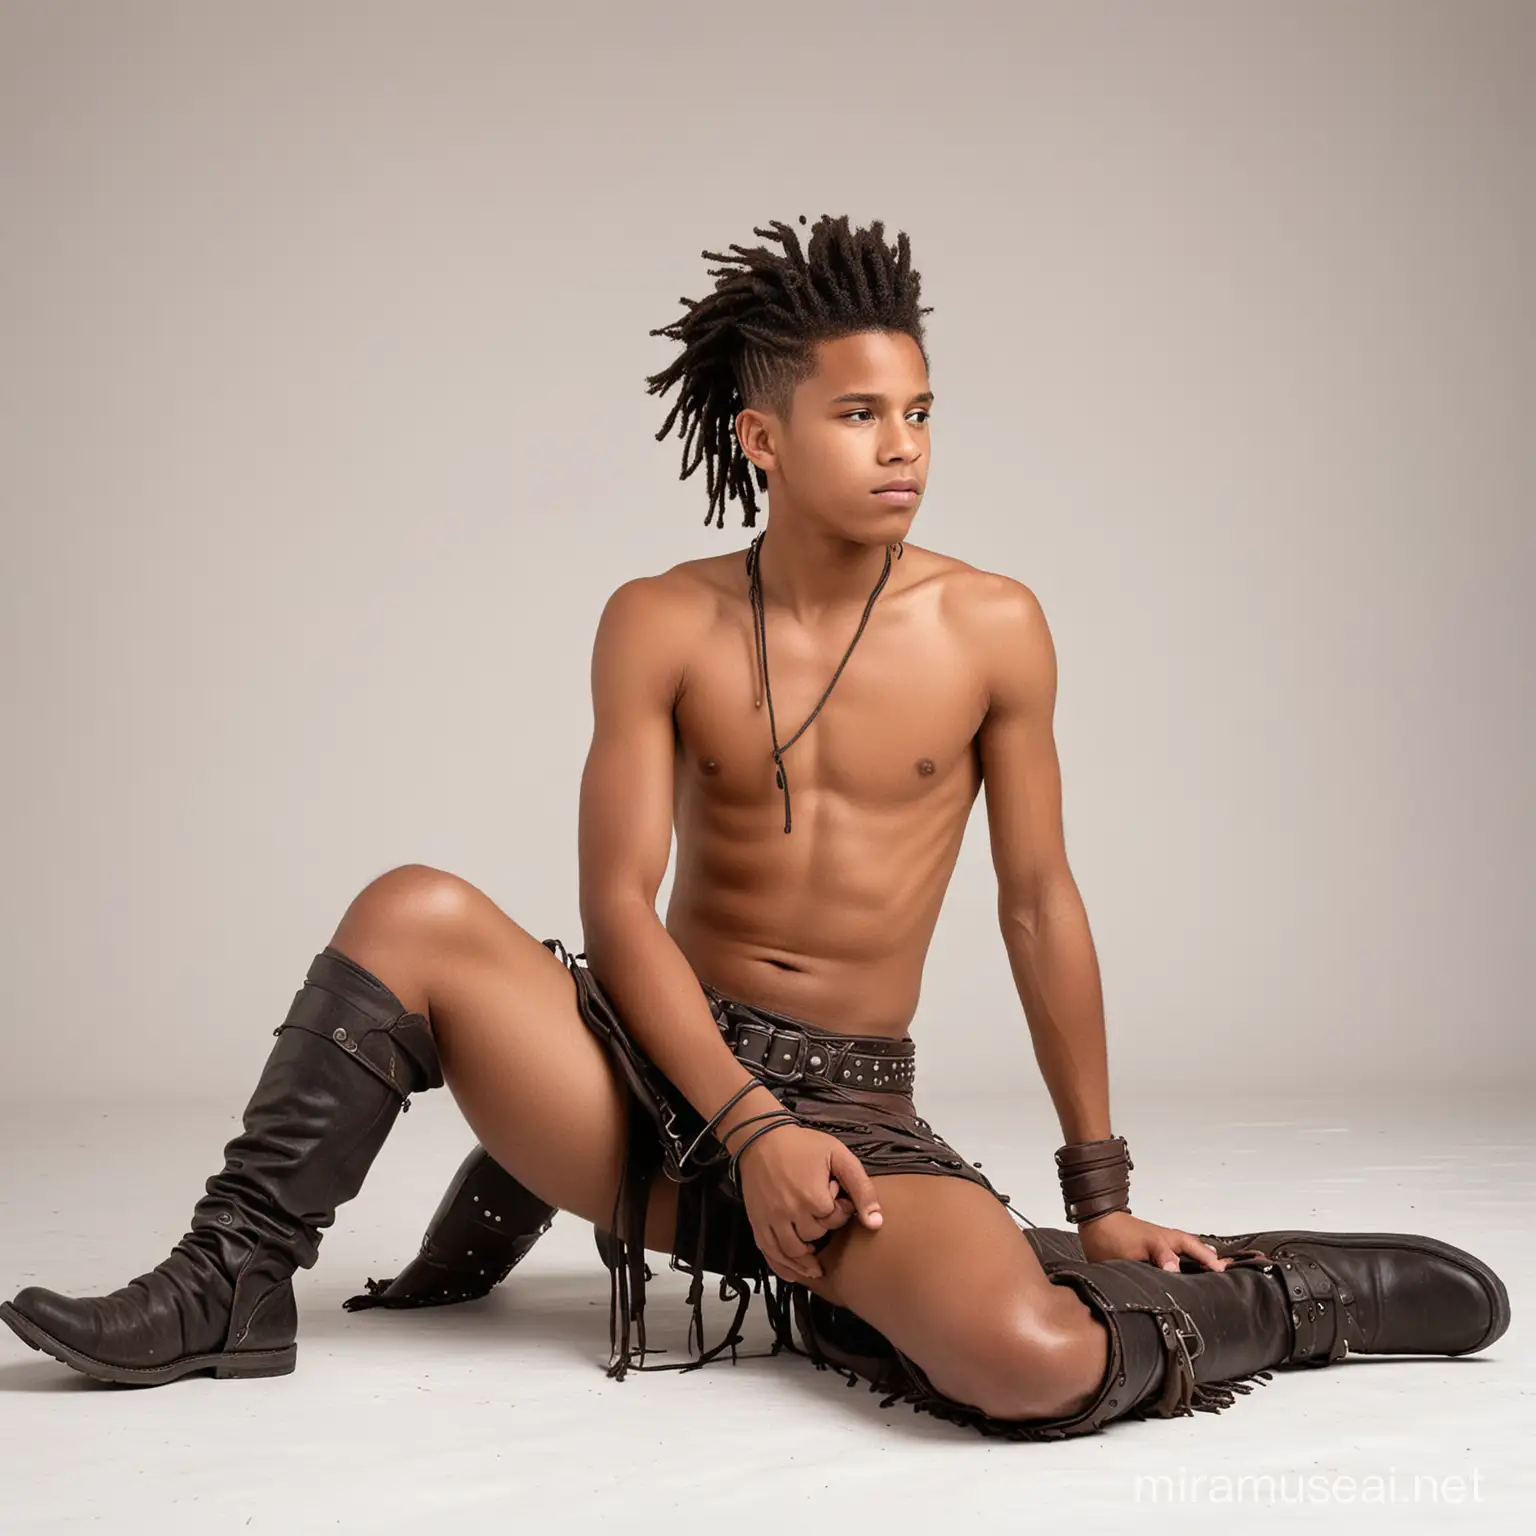 A very young black shirtless teenage boy warrior with dreadlocks, wearing a very short loincloth with a big leather belt and boots, lying on his stomach and turning his head slightly to the side, white background.